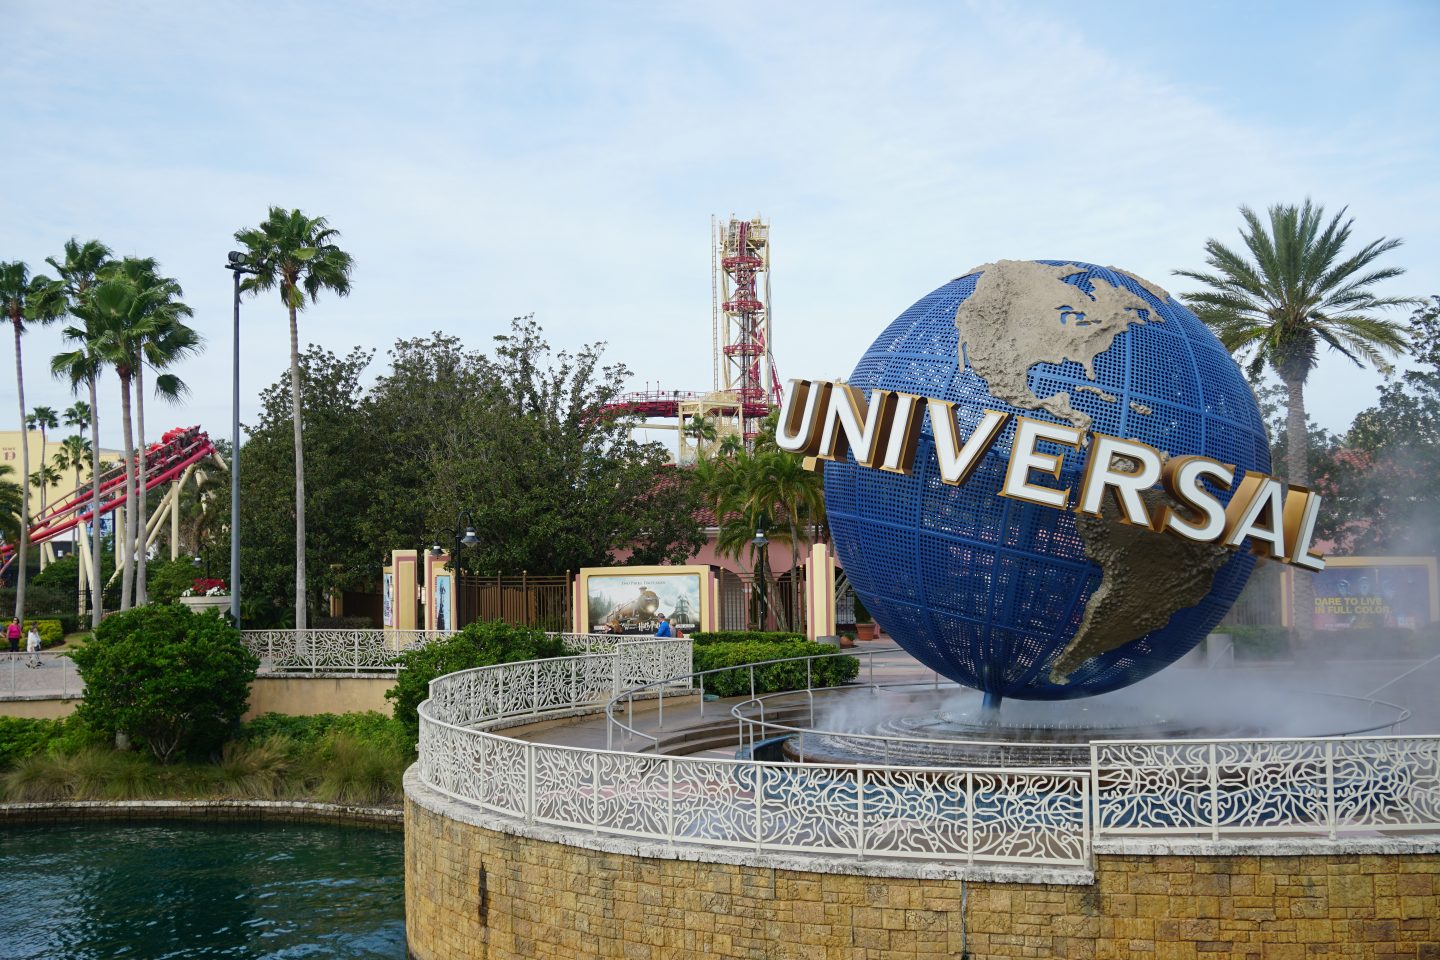 Best Tips for Universal's Islands of Adventure with Kids - Mess for Less